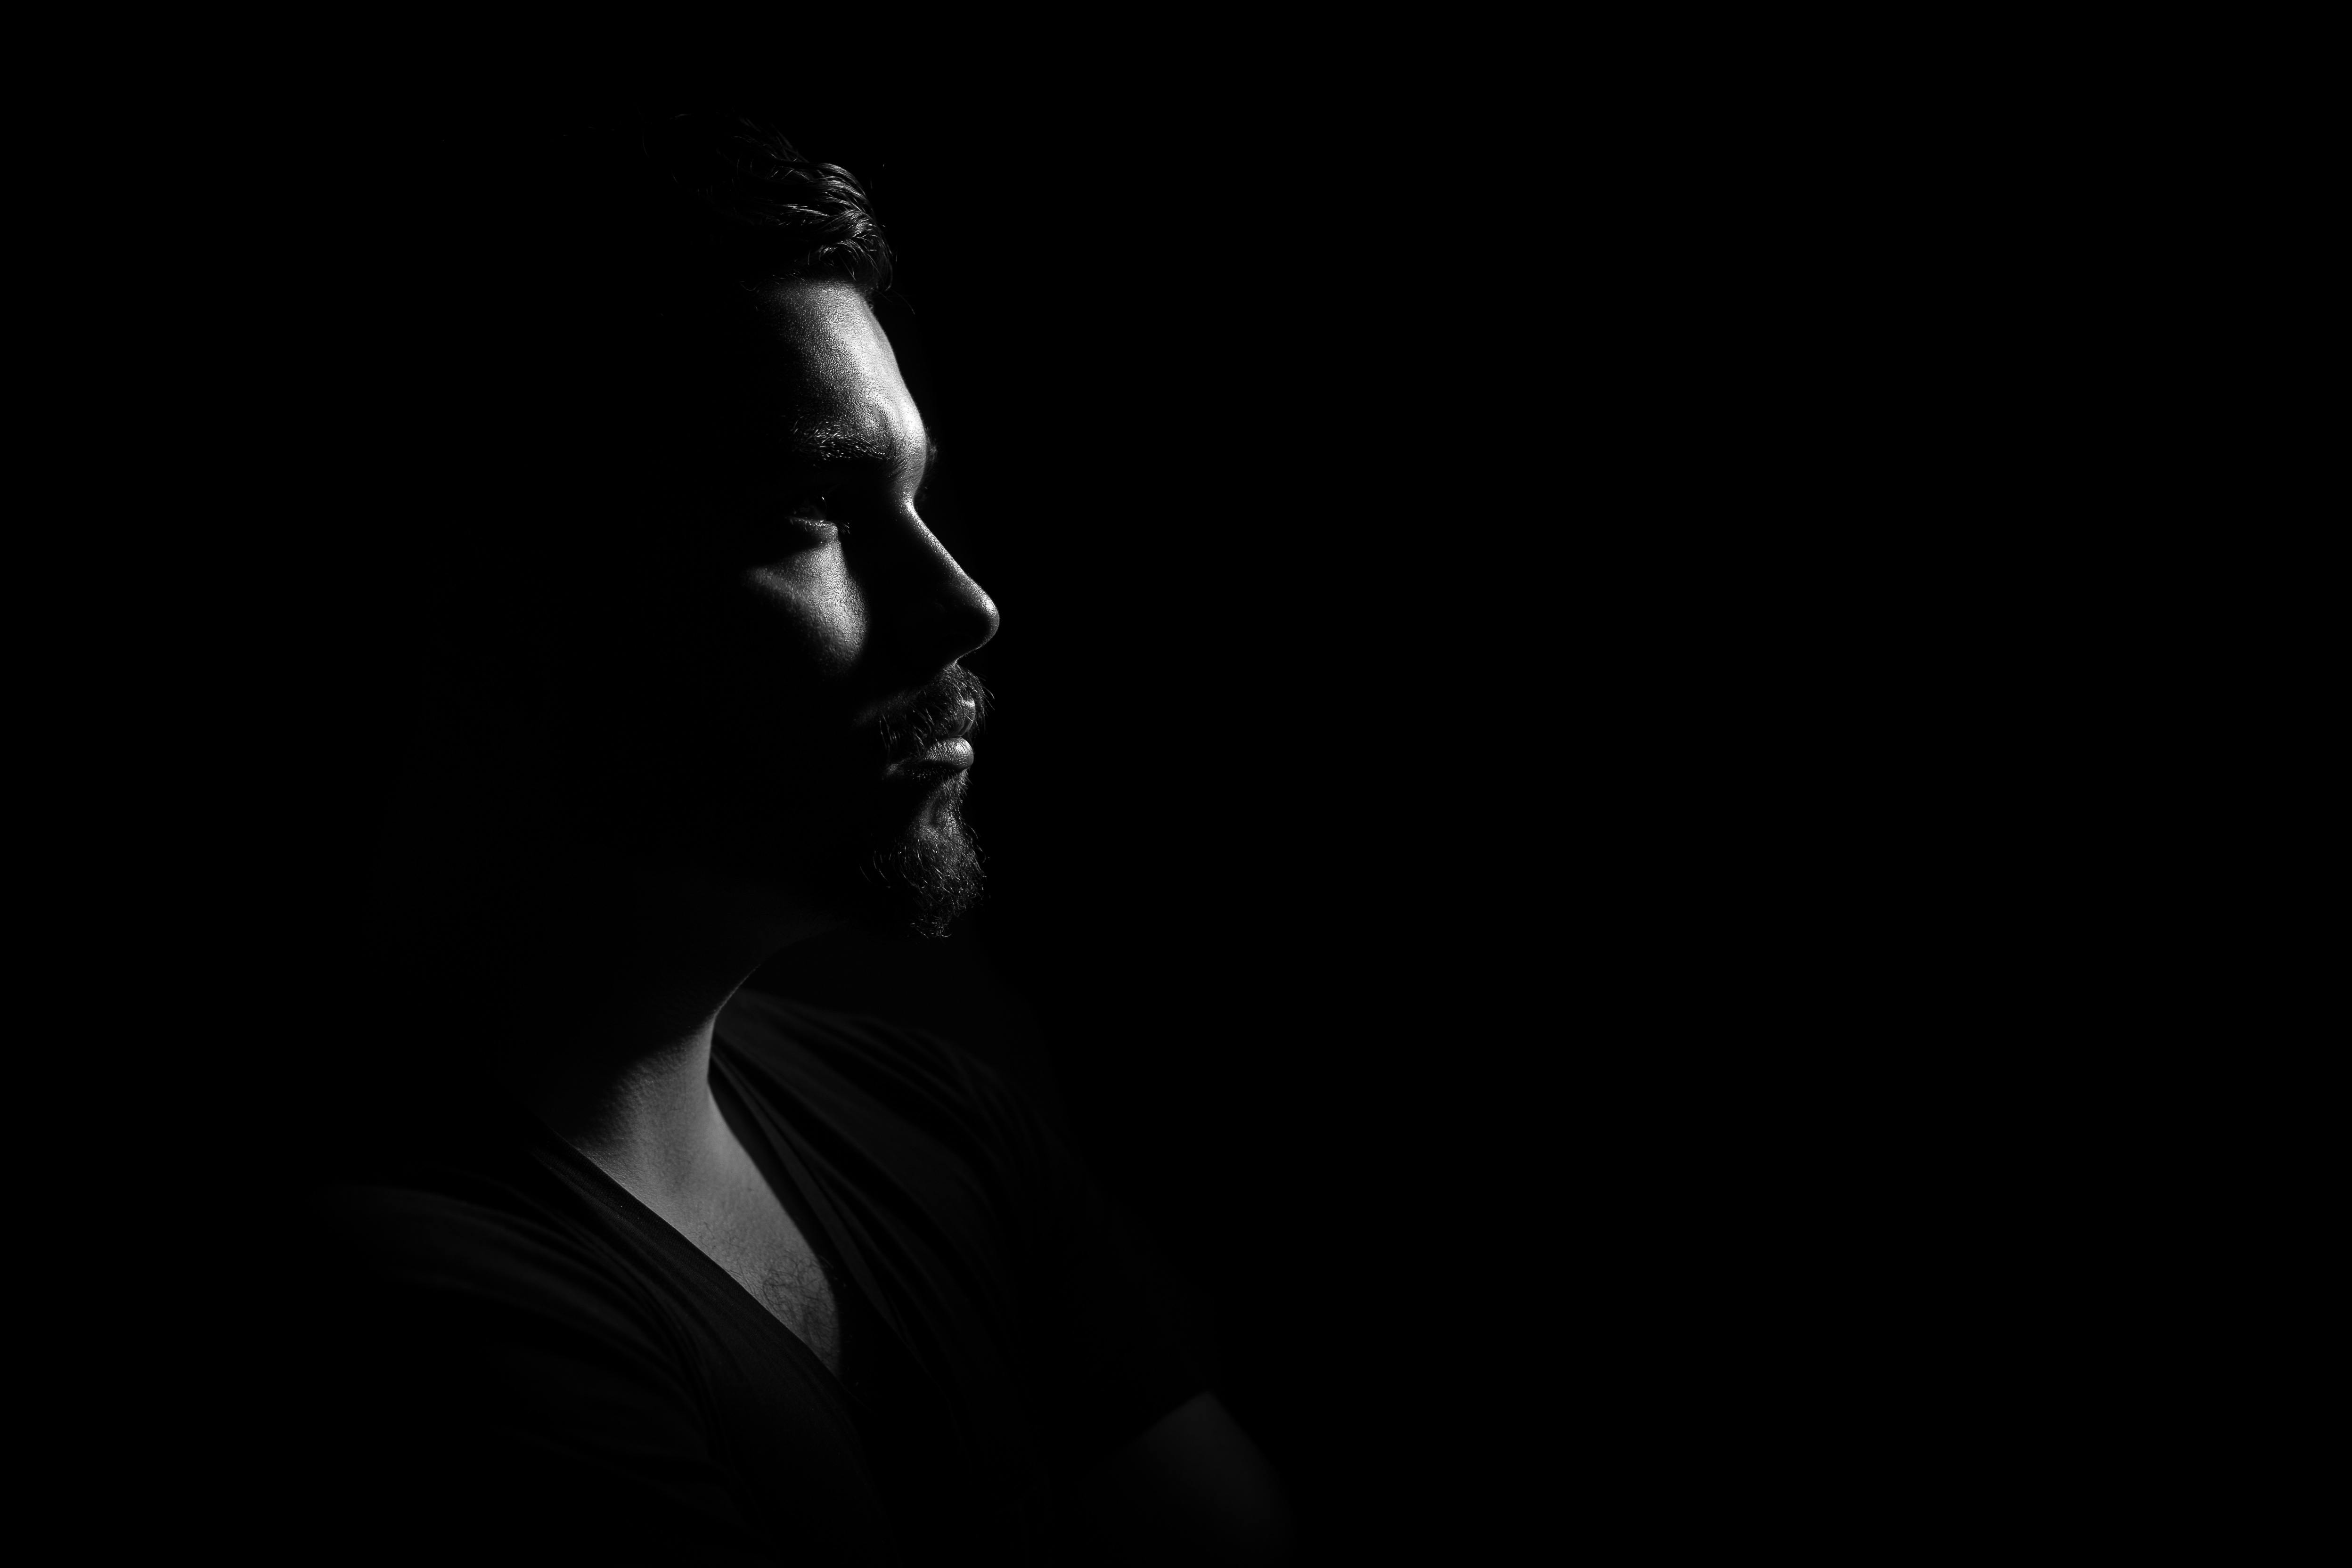 Grayscale Photo of Man in Black V Neck Shirt With Black Background · Free  Stock Photo